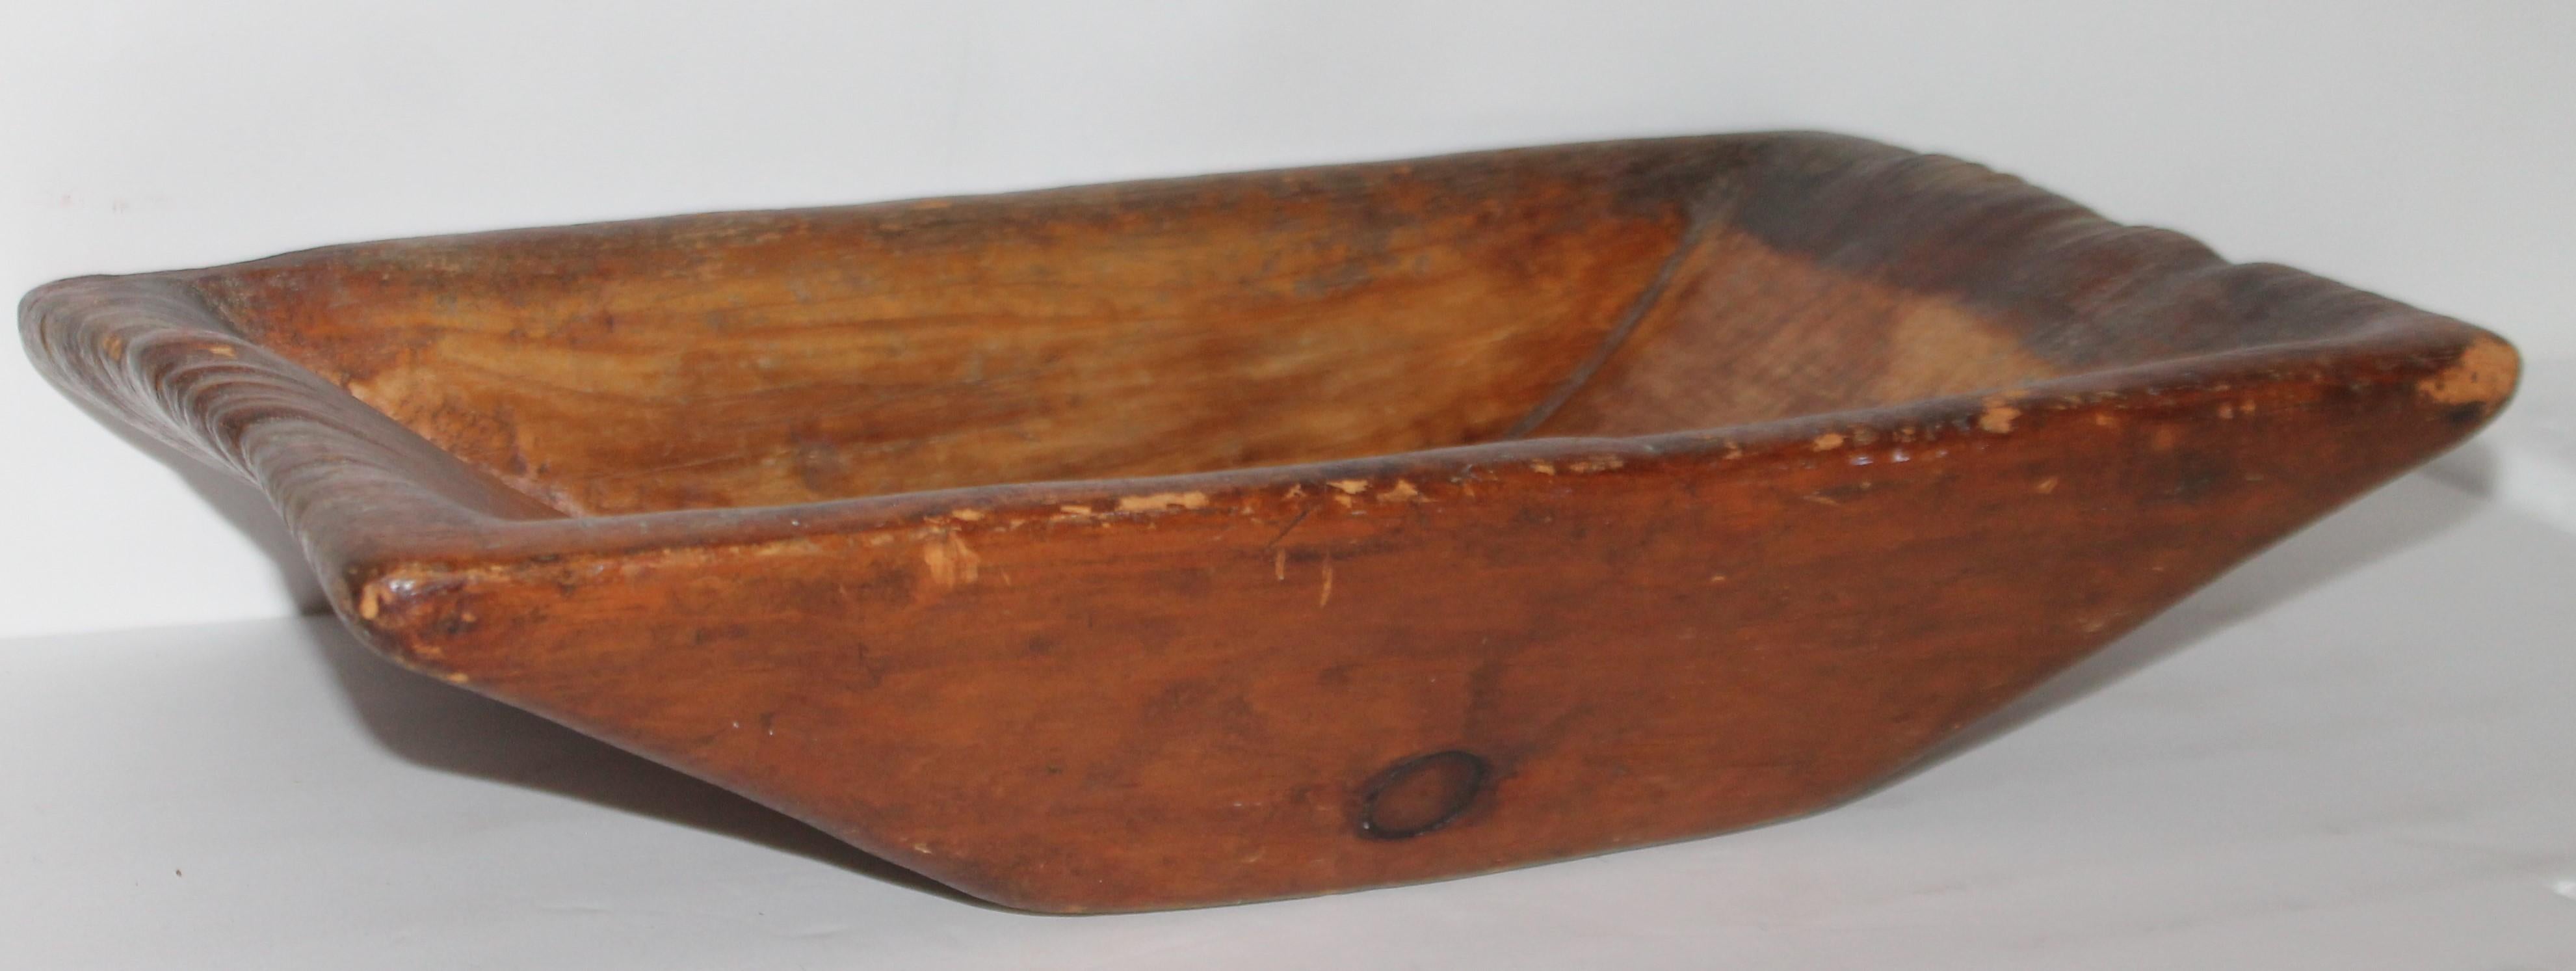 American 19th Century Early Dough Bowl From New England